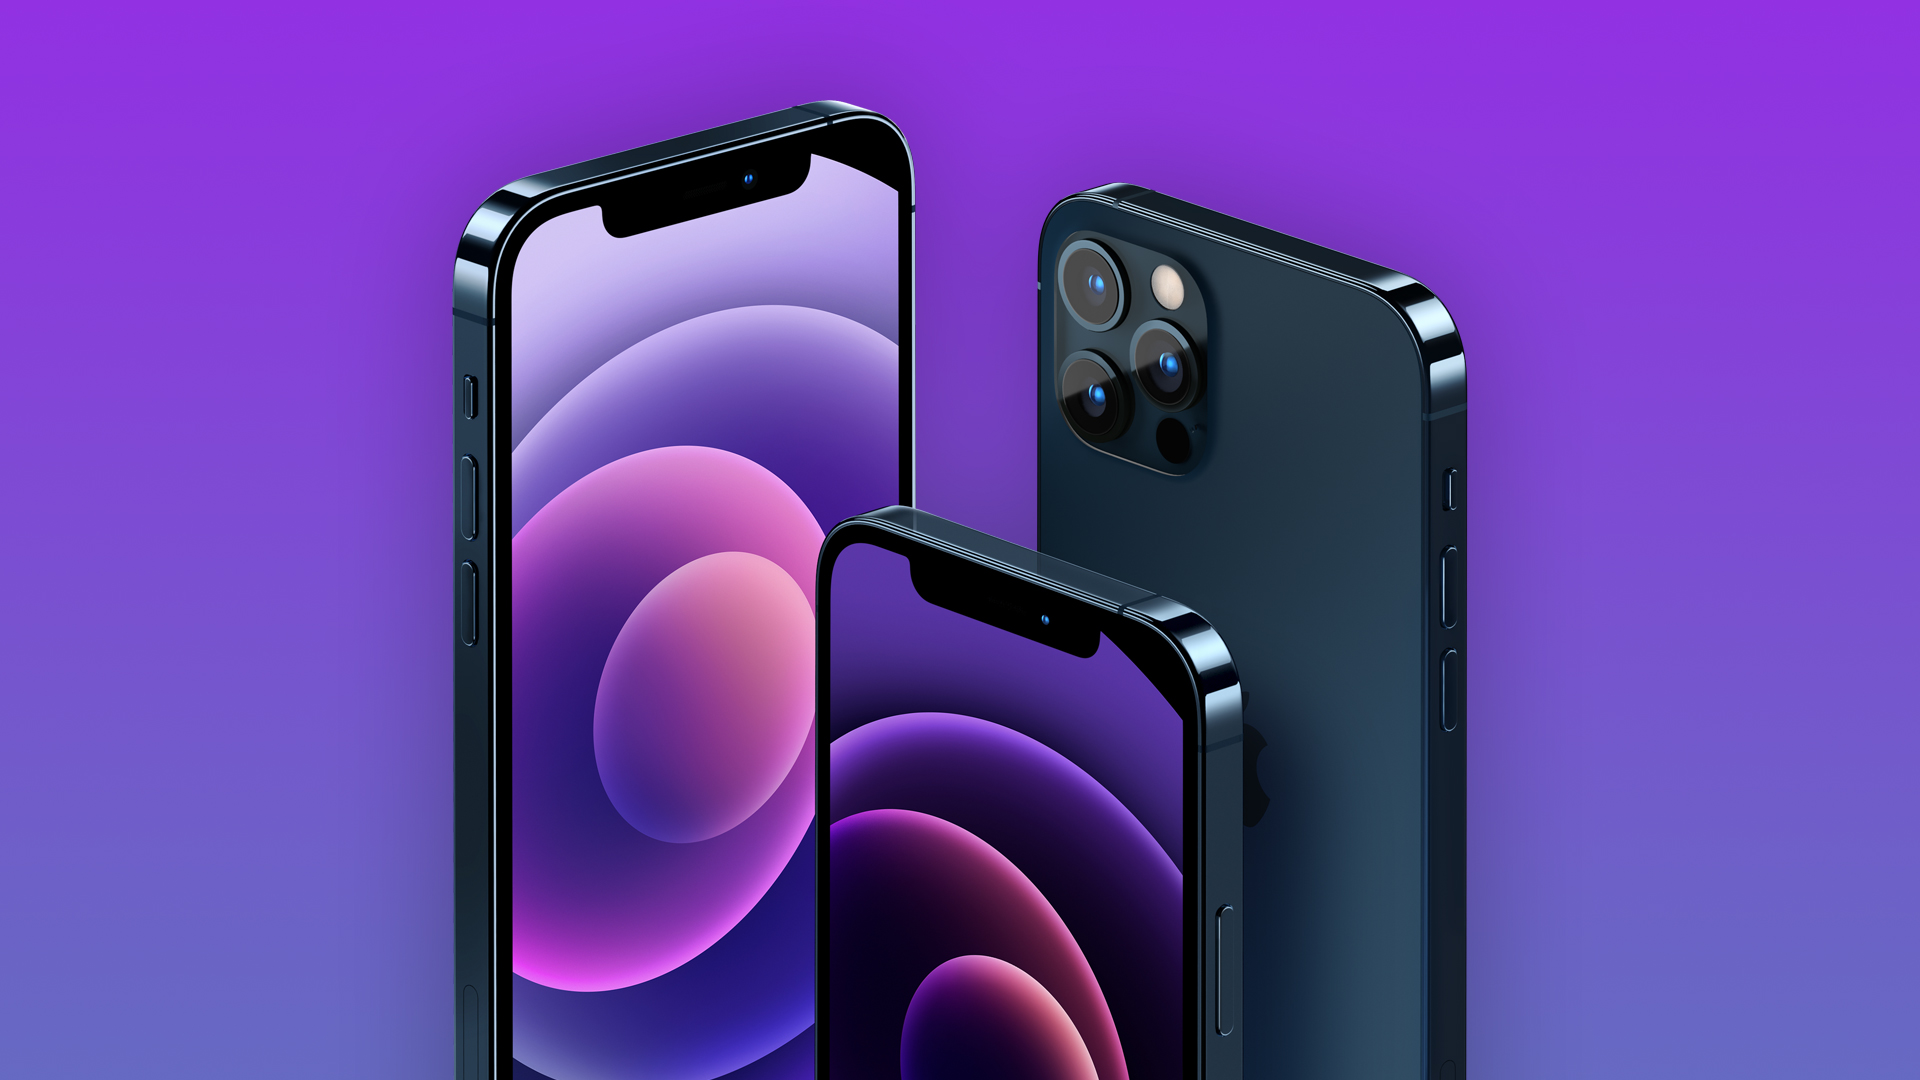 Download The New Purple Iphone 12 Wallpaper For Your Devices Right Here 9to5mac